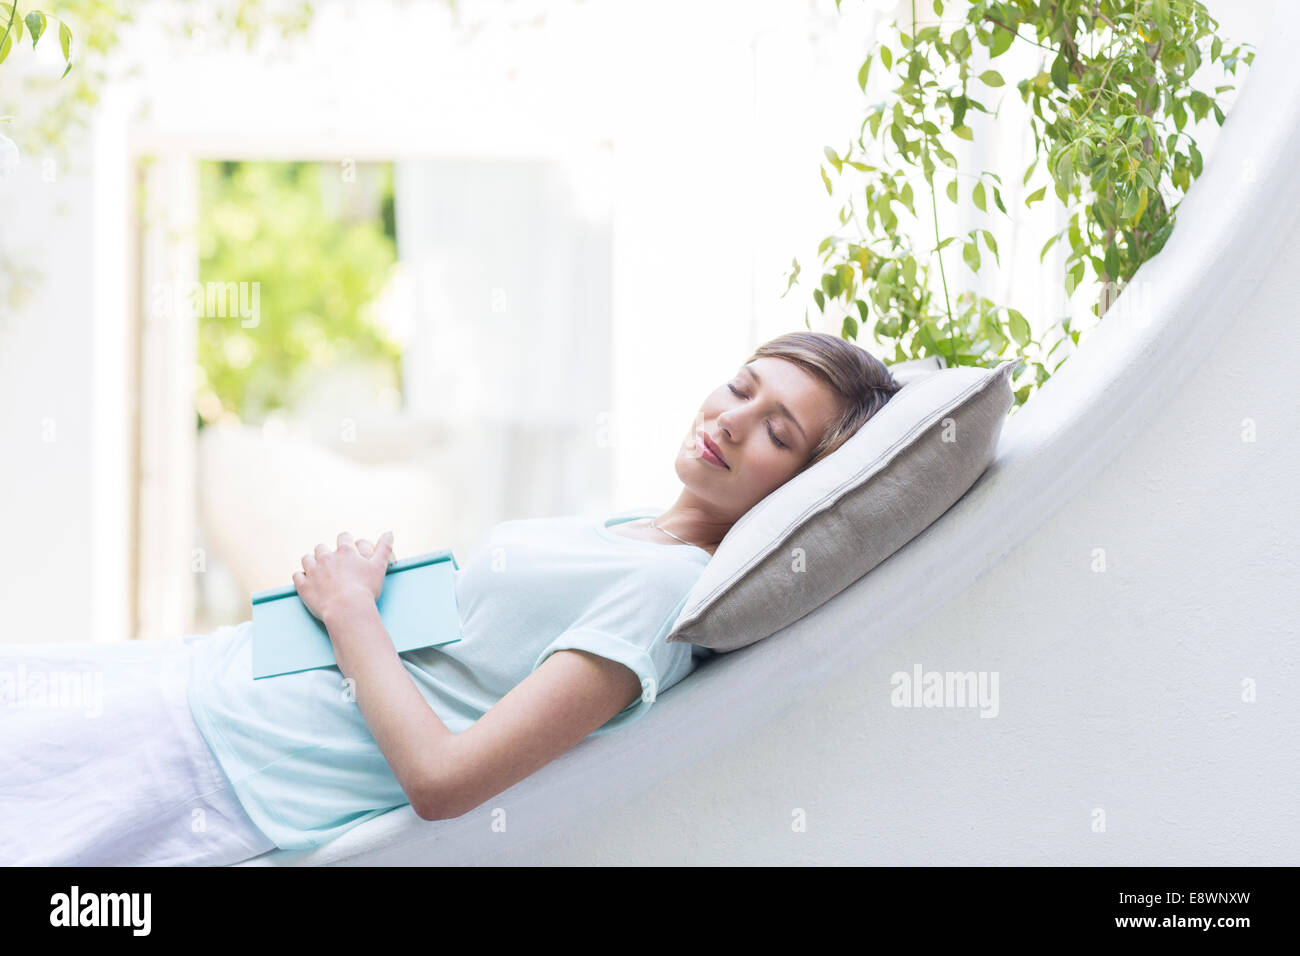 Woman relaxing on pillow outdoors Stock Photo